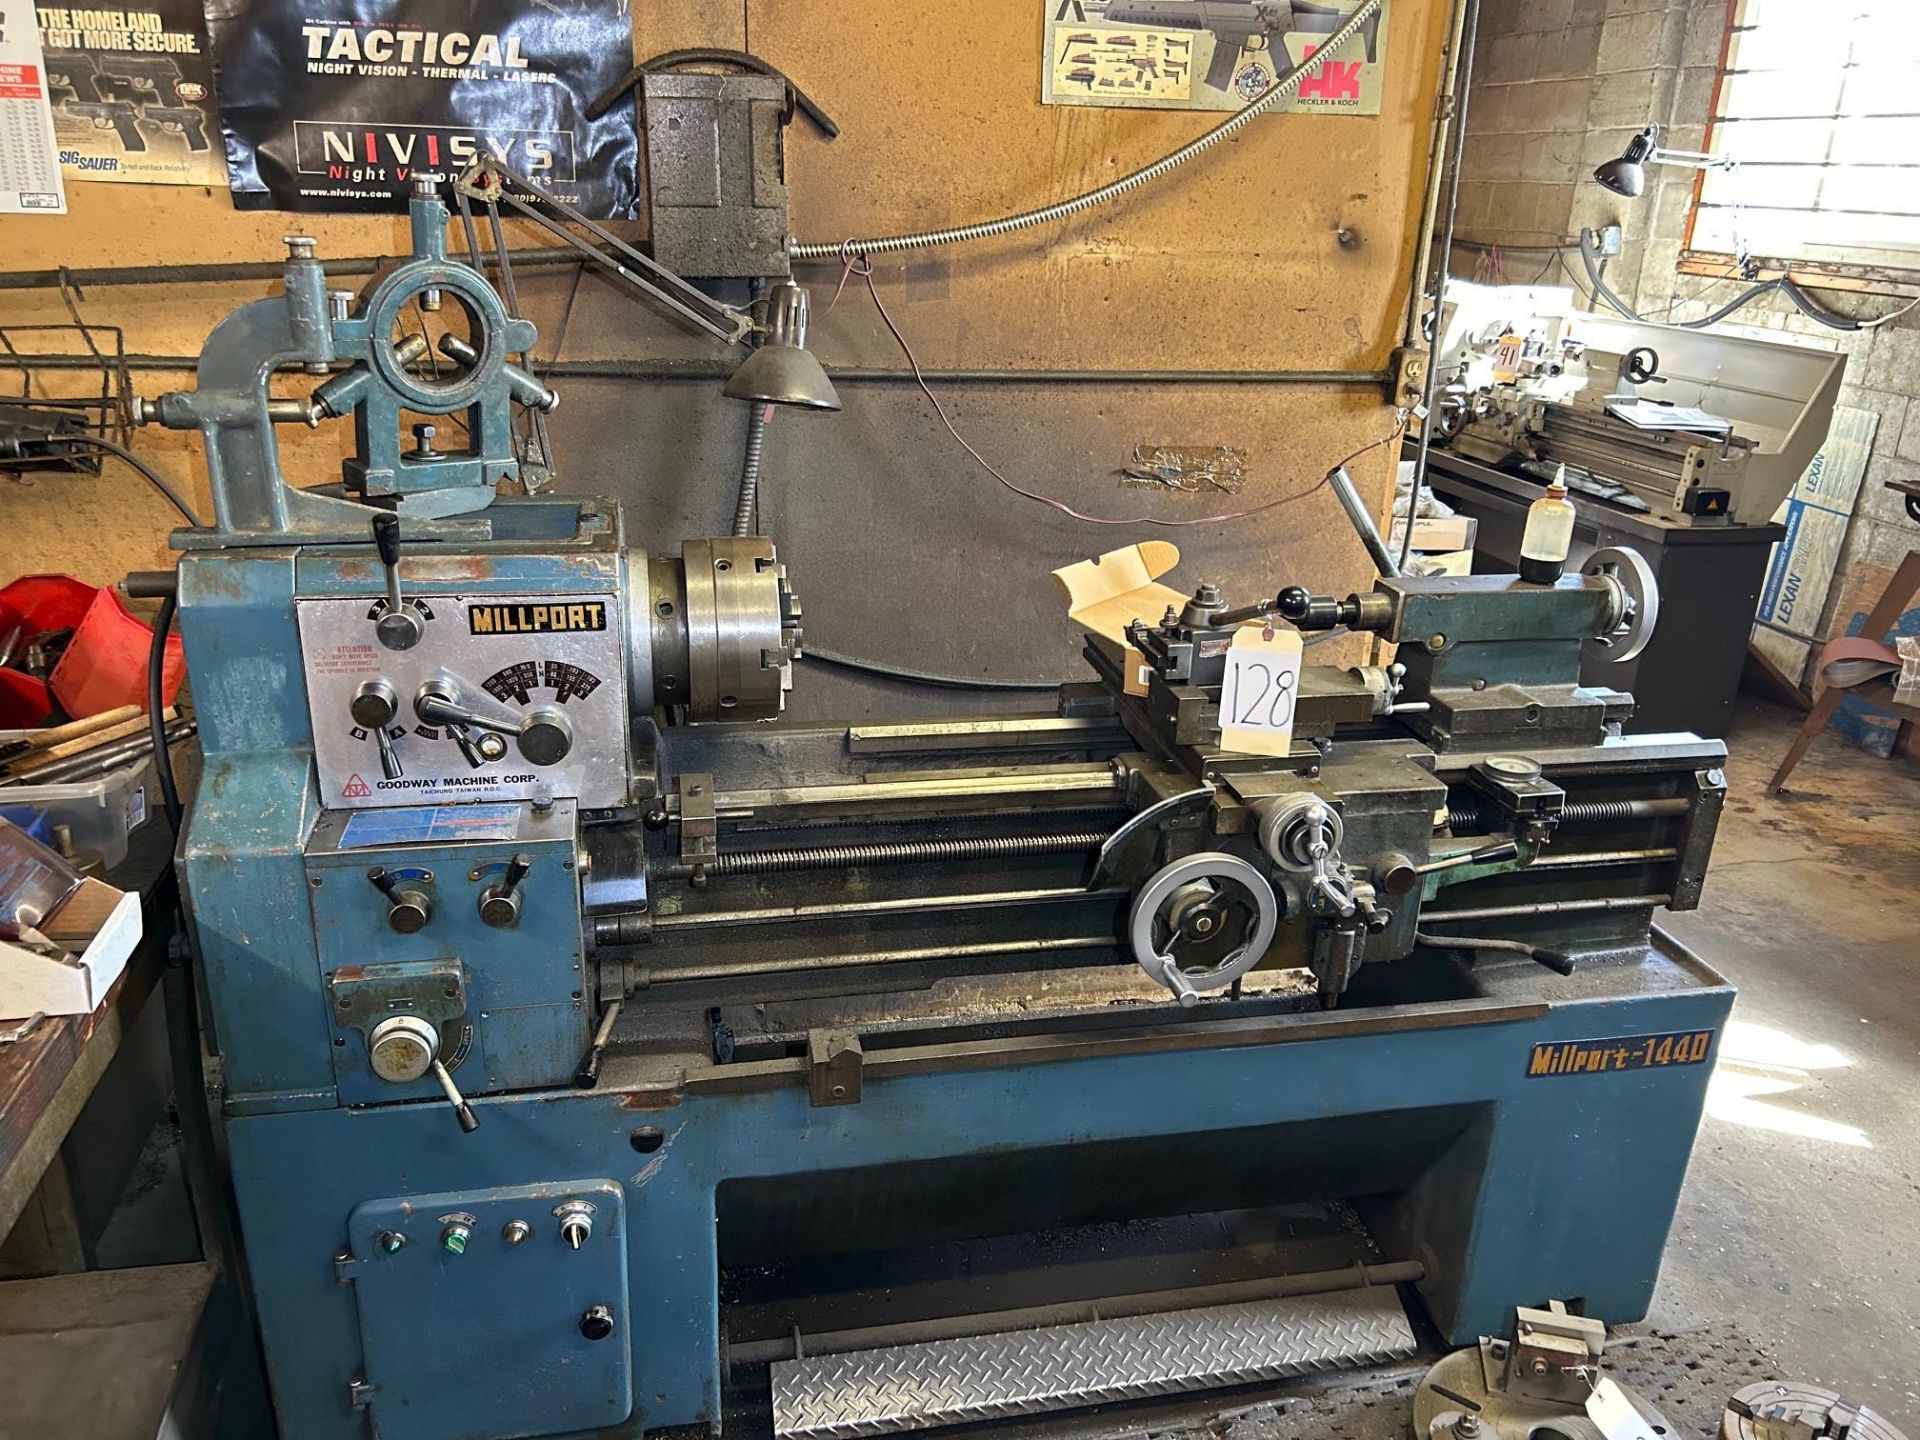 Millport Tool Room Lathe, Model: 1140, includes: Steady Rest, Face Plate